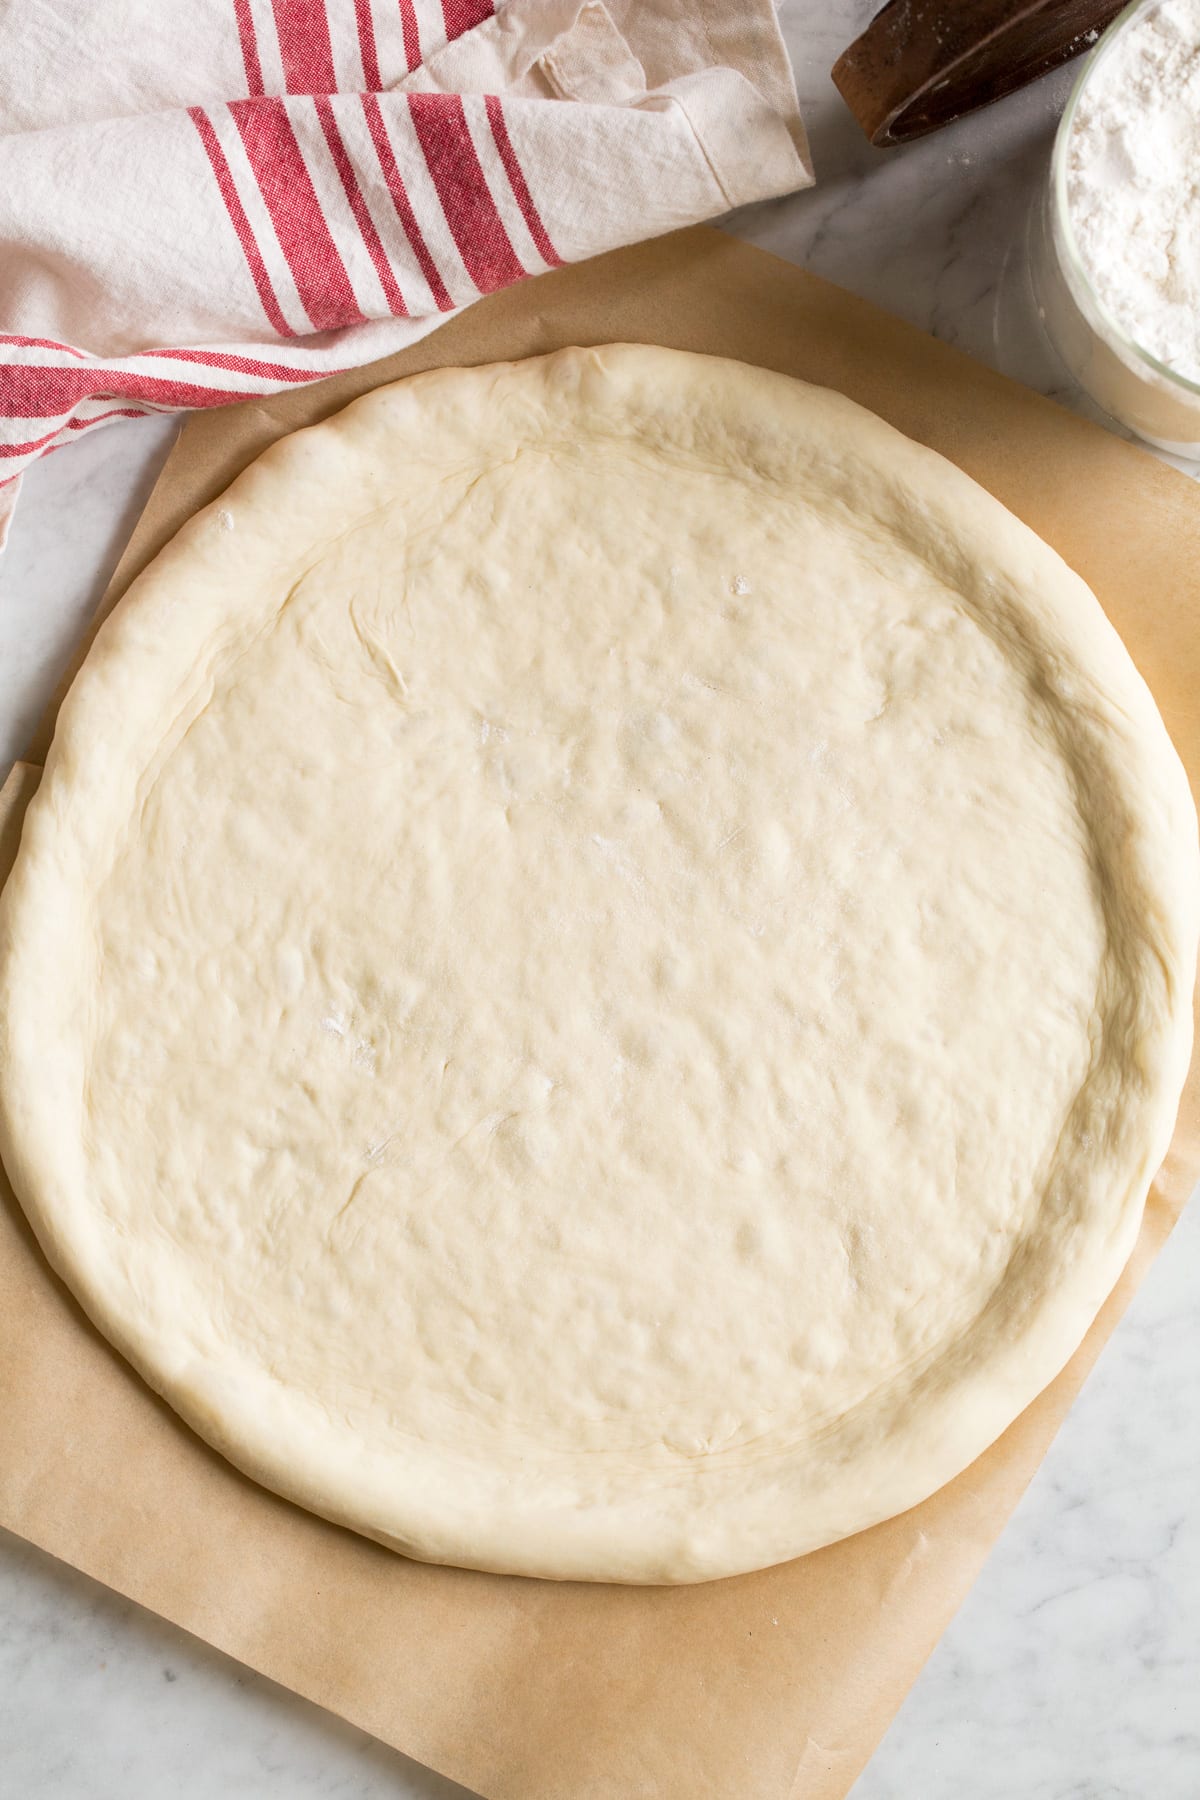 Overhead image of shaped pizza crust without toppings.